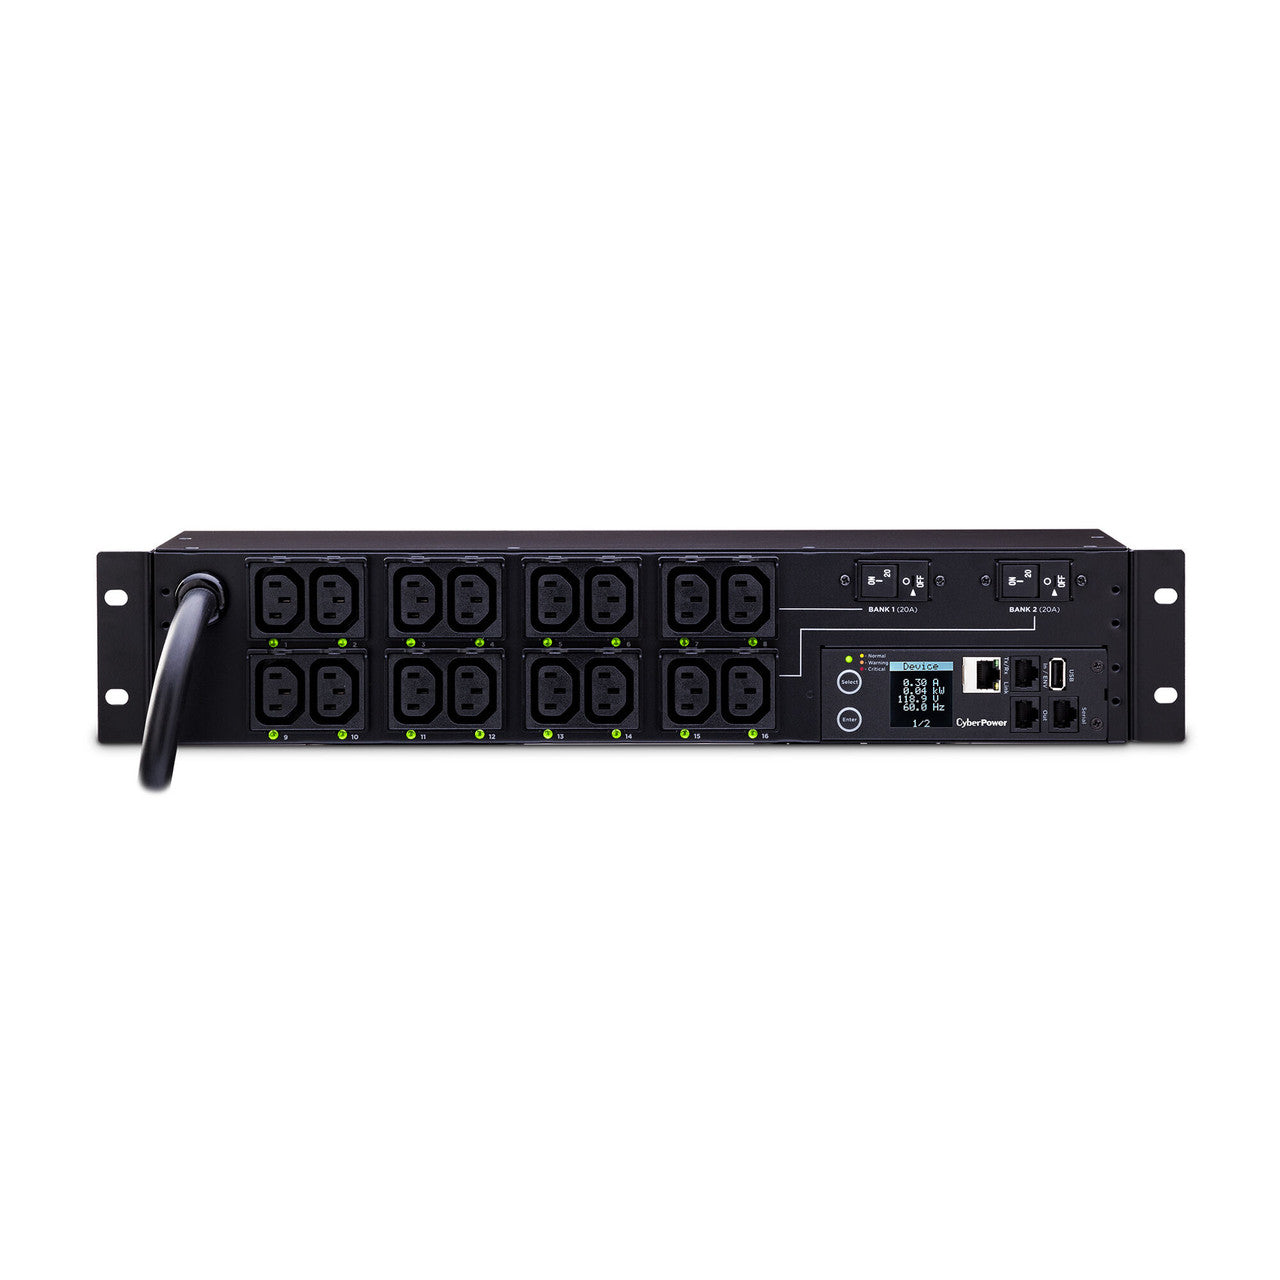 CyberPower PDU81007 SW MBO PDU 30A 208V Metered-by-Outlet Switched PDU 16 C13 Outlets 12ft cord 3yr Warranty